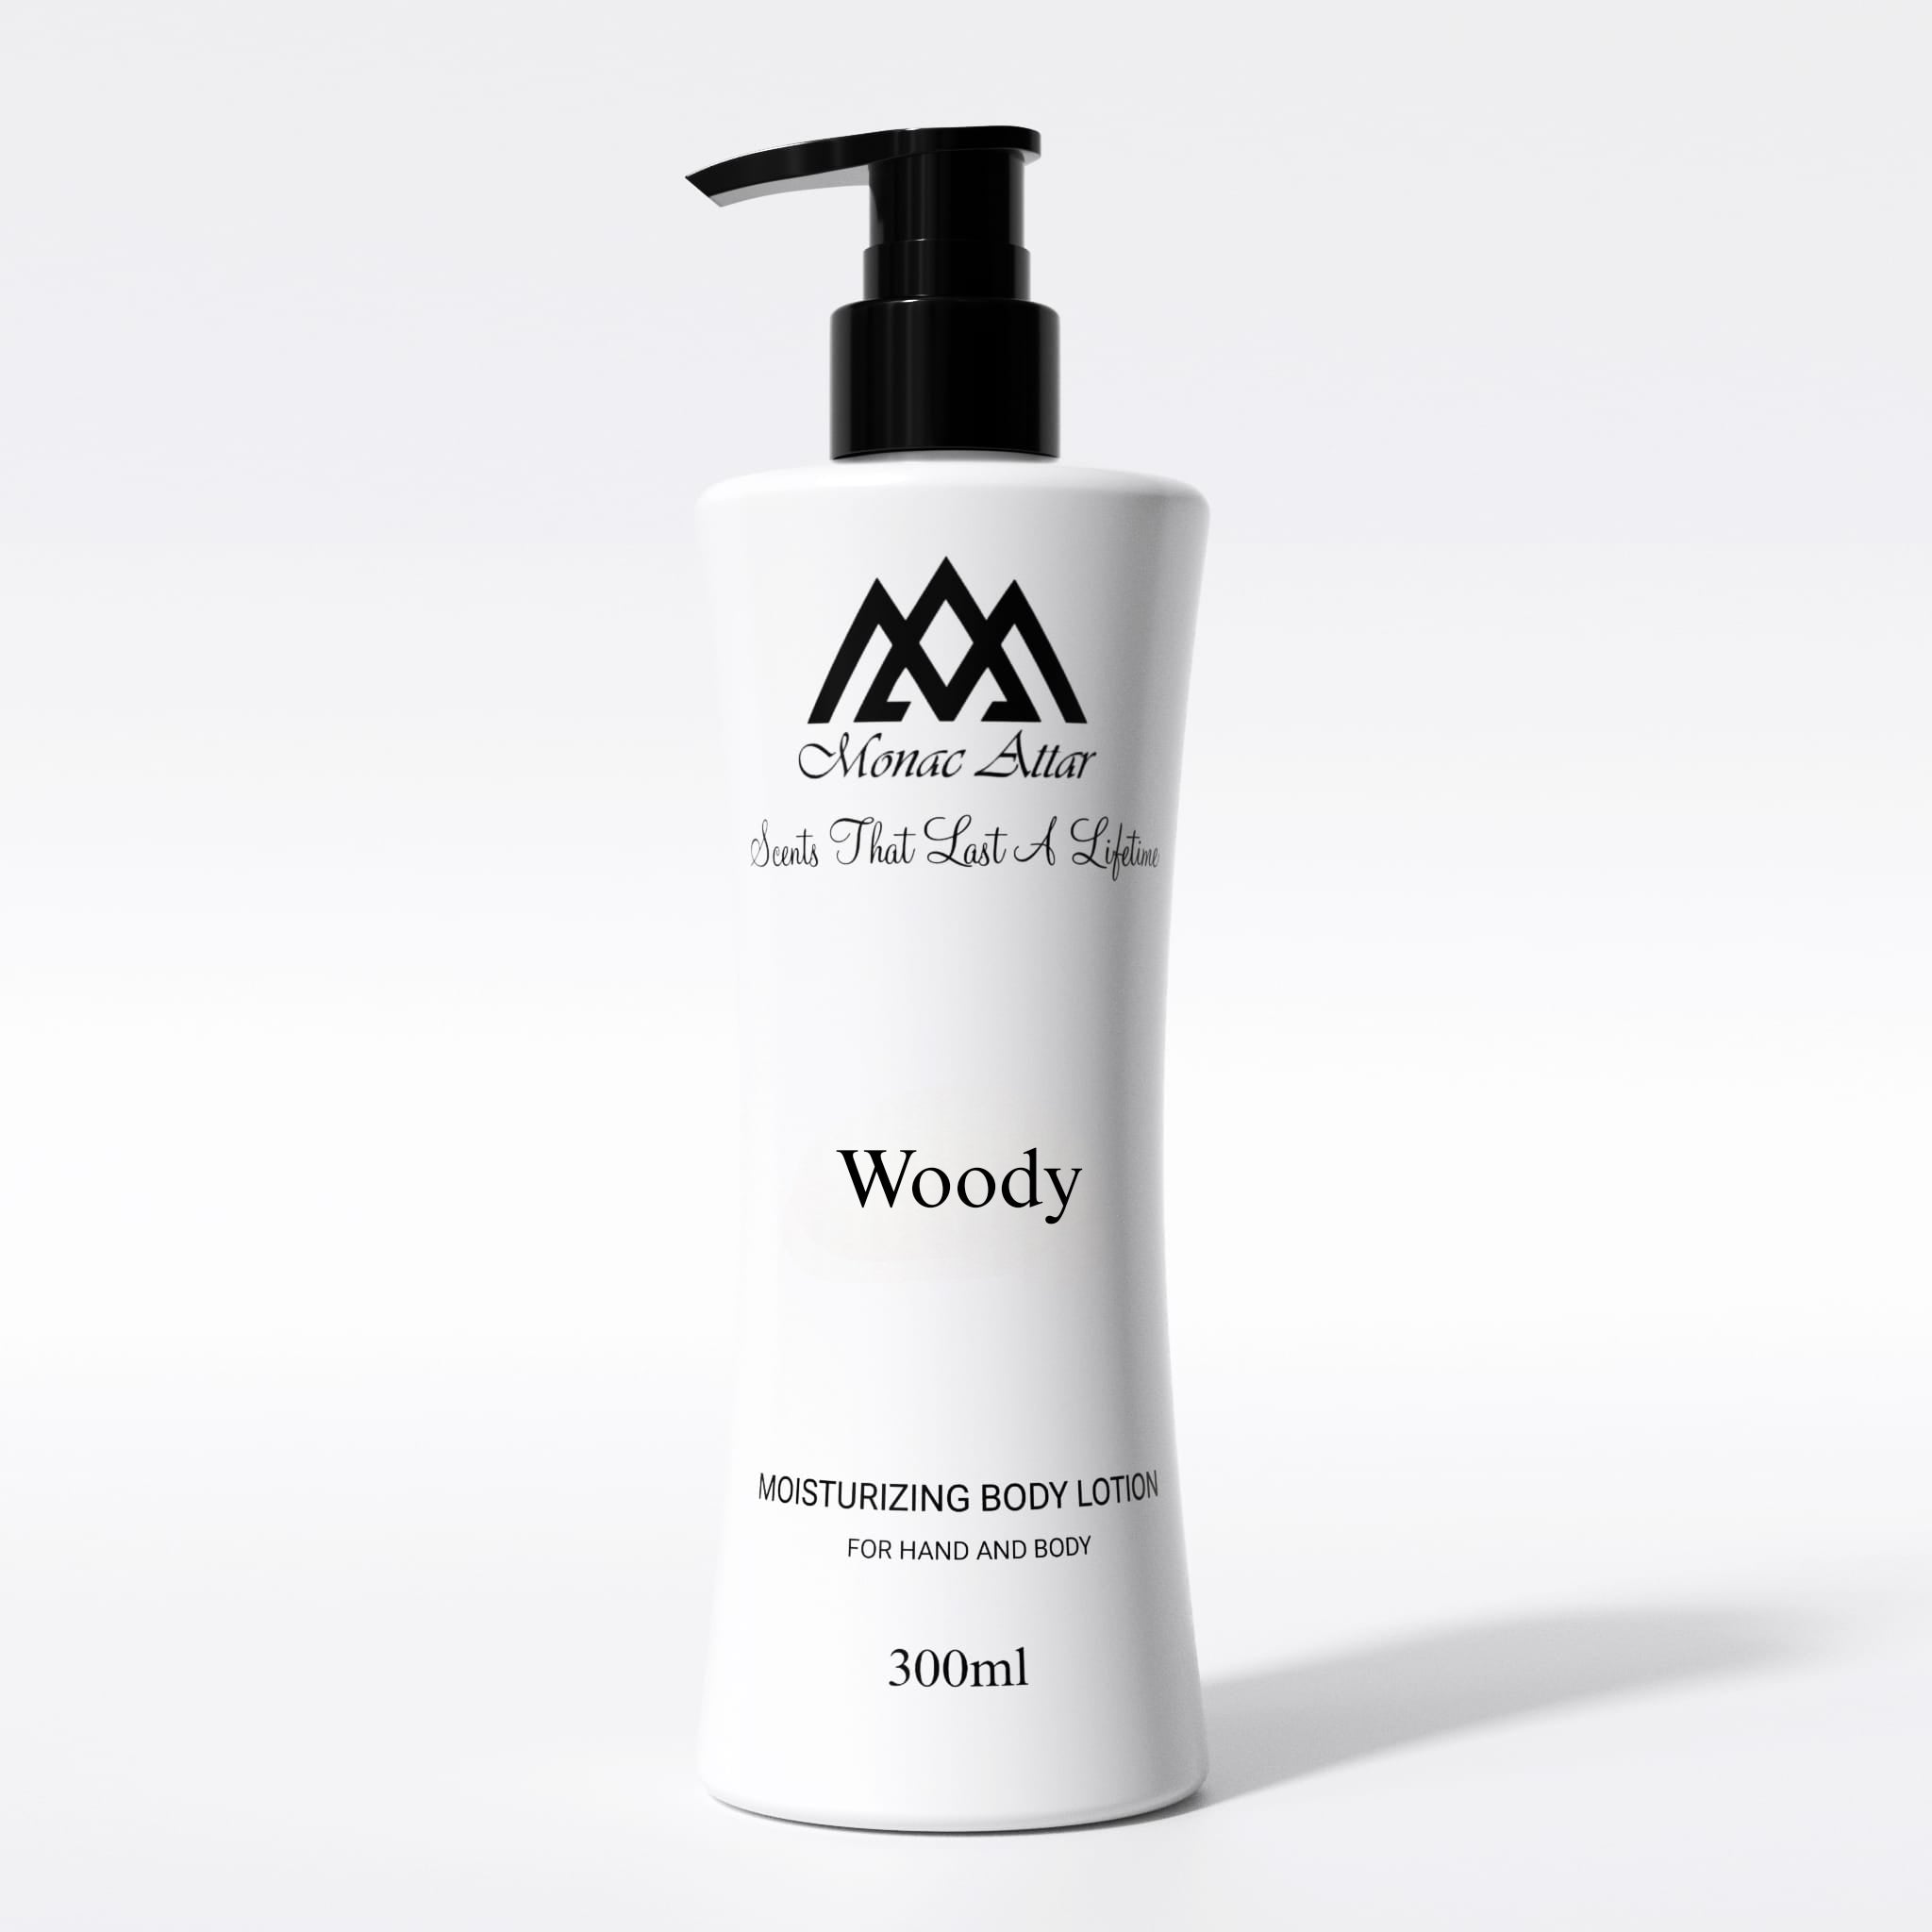 Woody Body Lotion